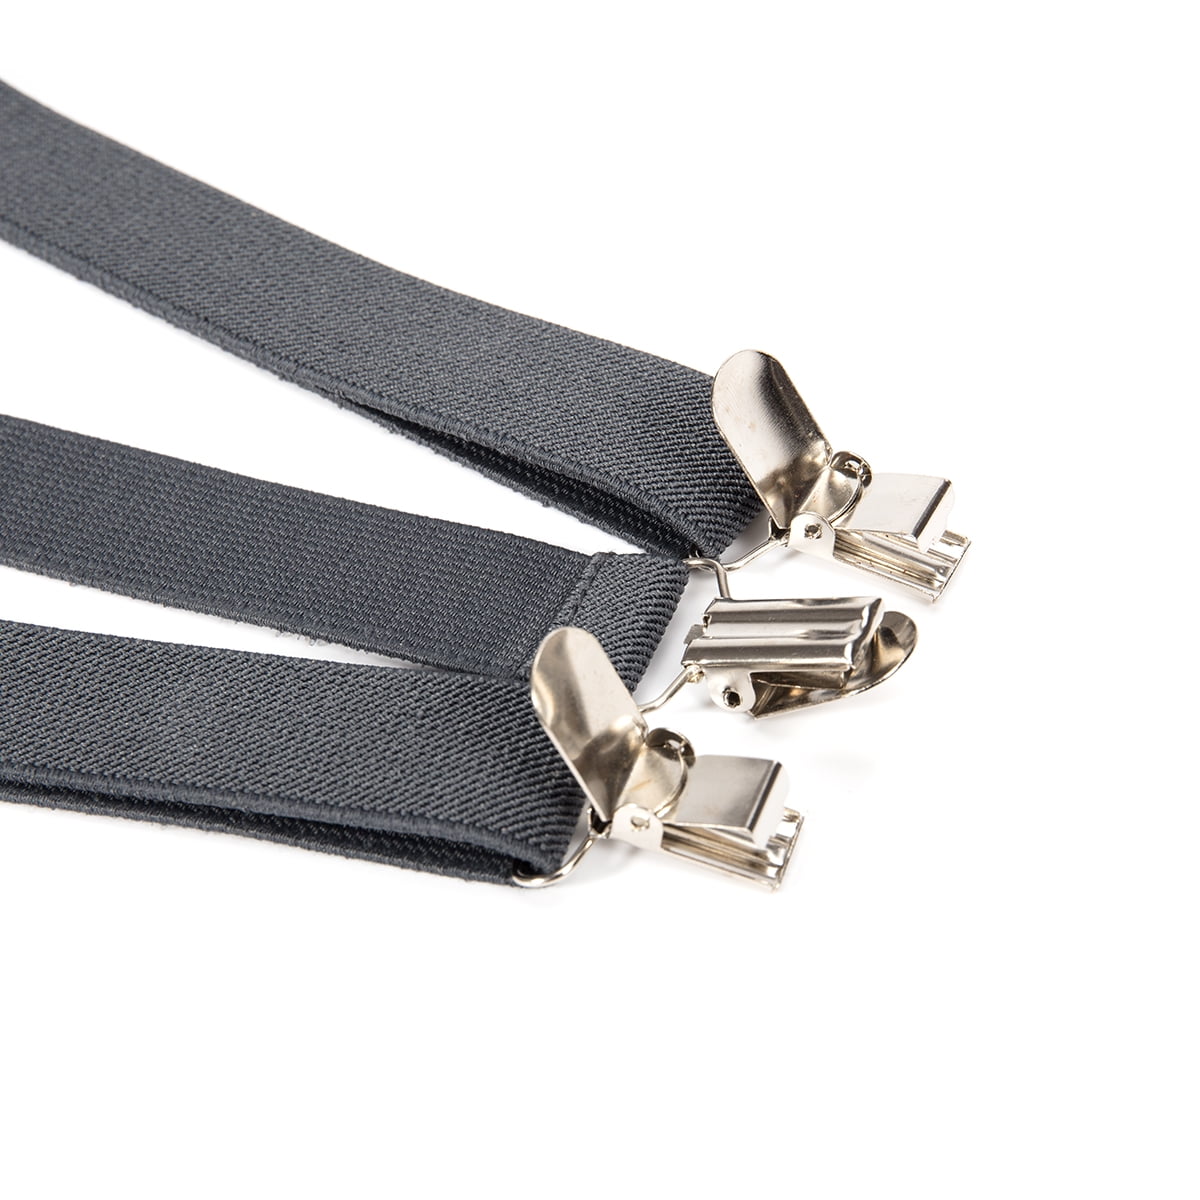 Kajeer Mens Adjustable Button End Suspenders - Y-Back Elastic Tuxedo Suspenders with Heavy Duty Leather Buttons End